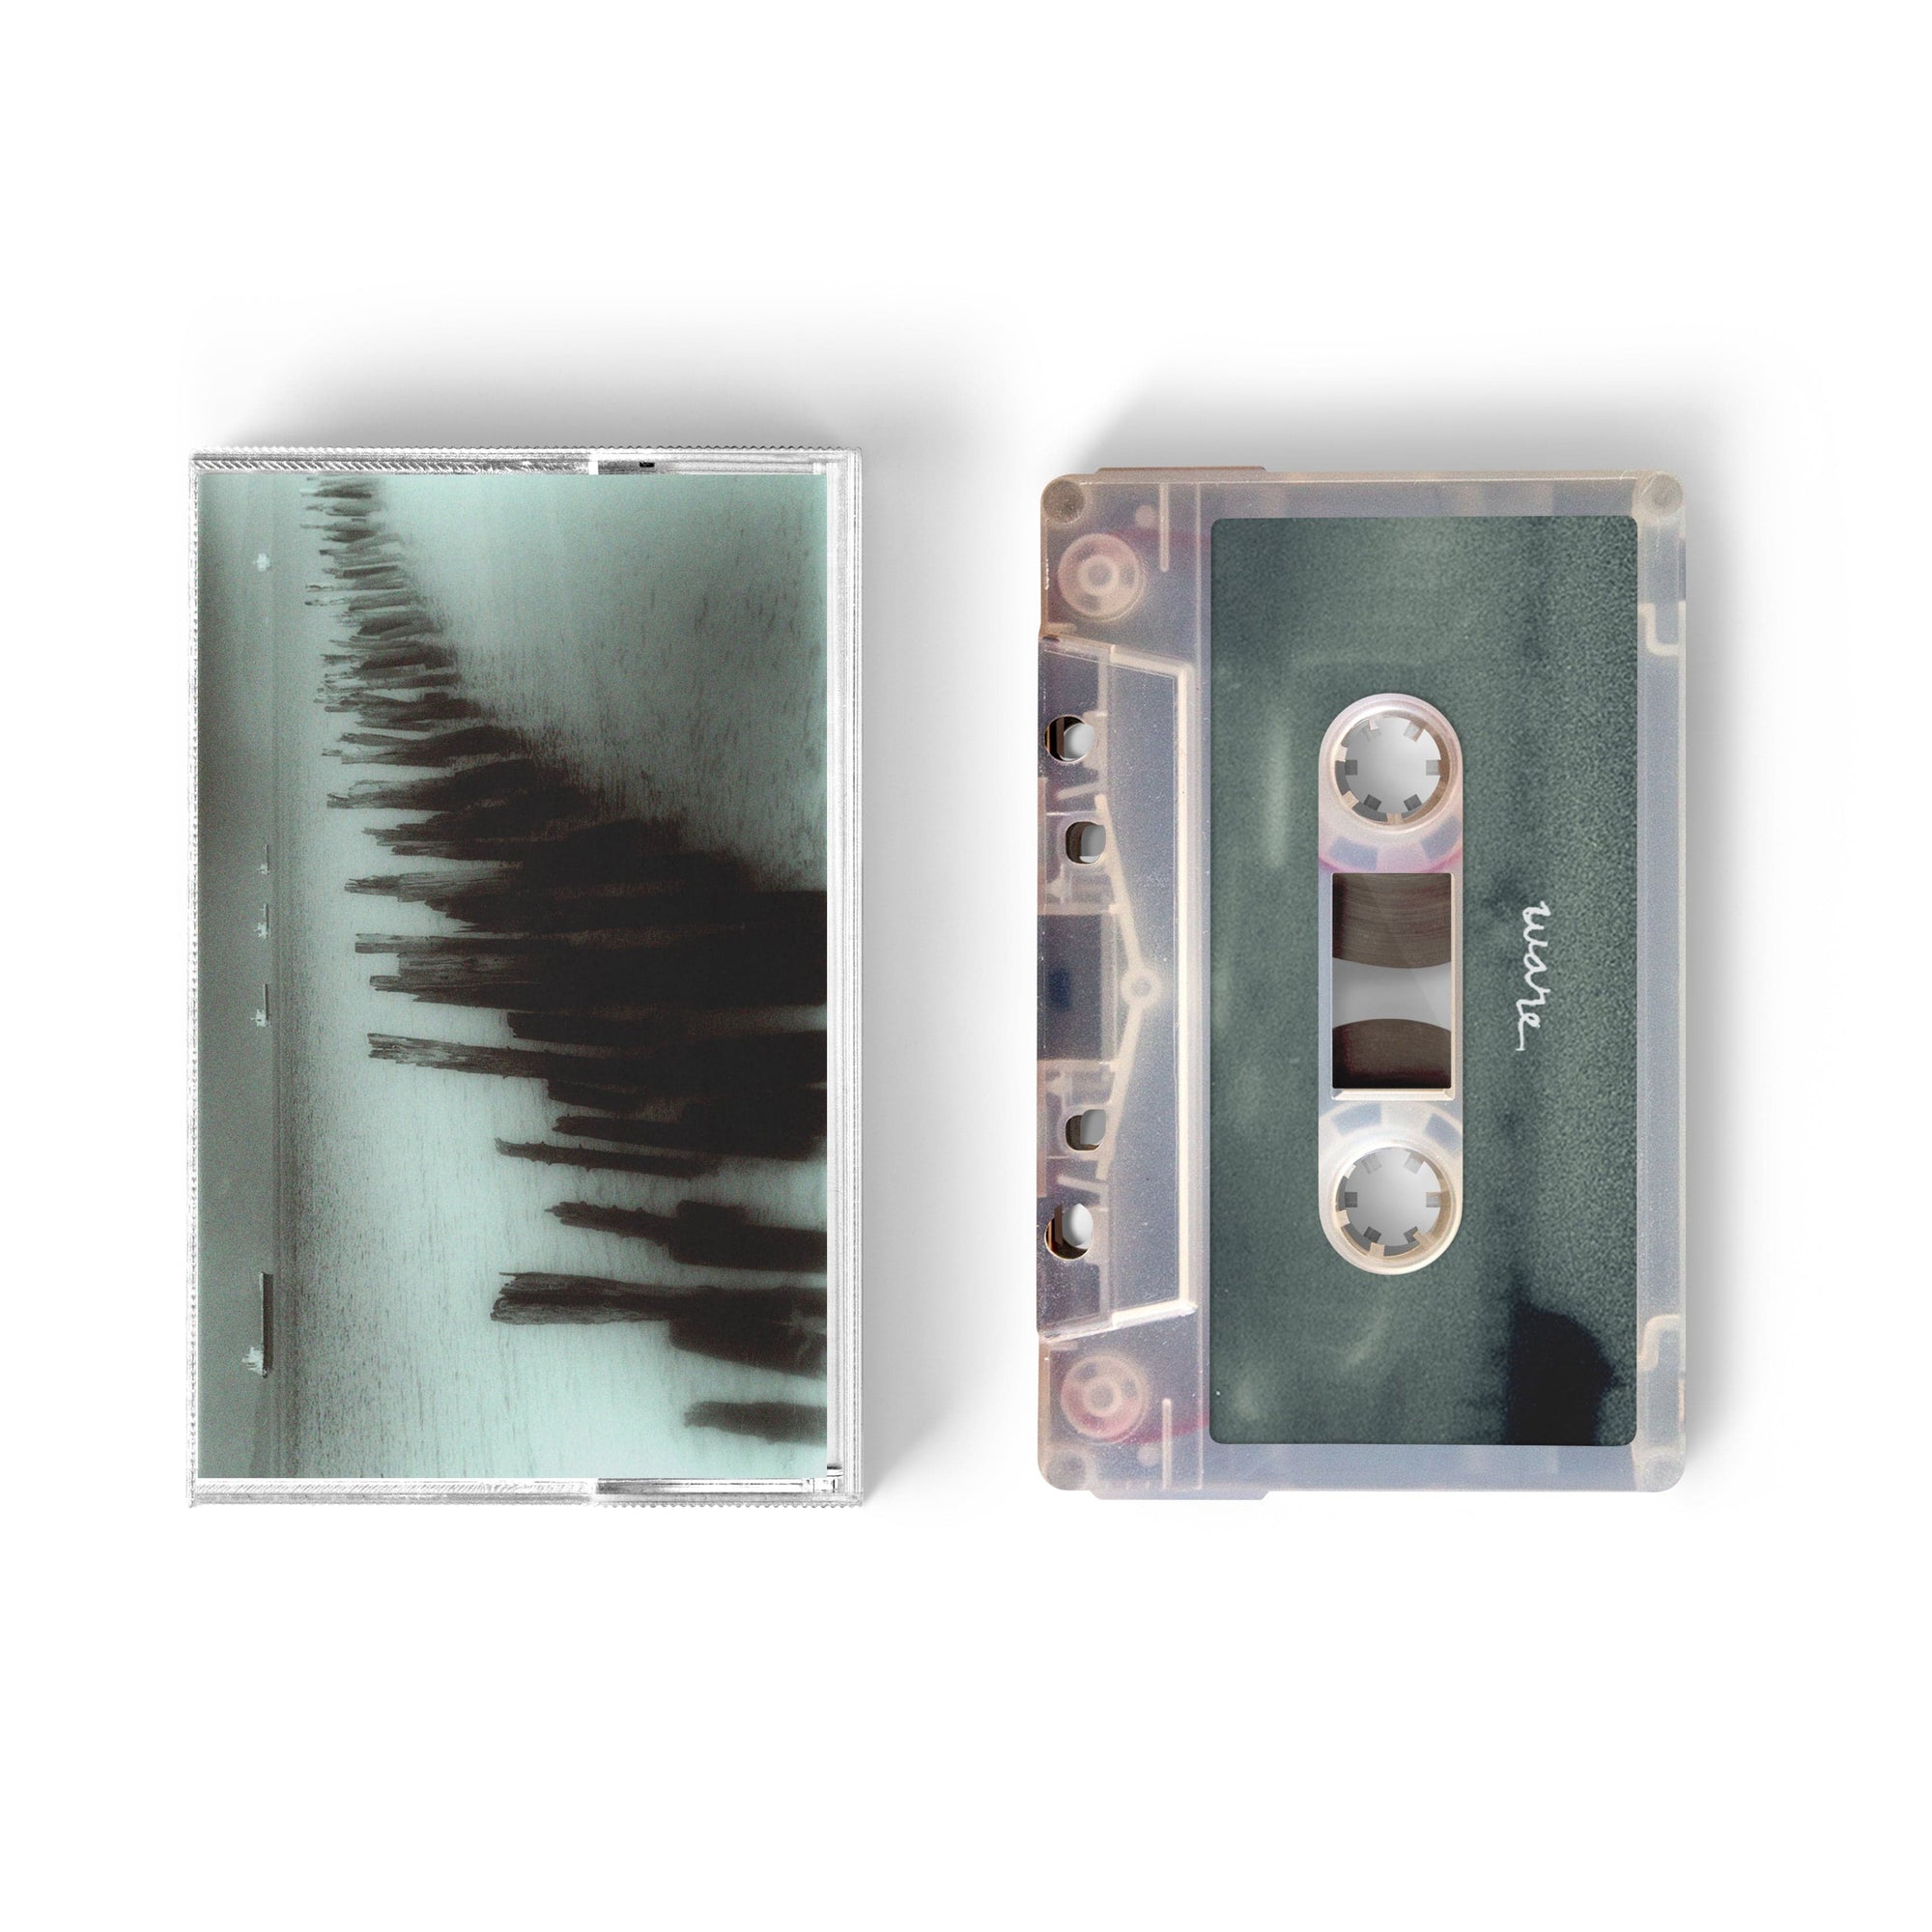 The Flenser Tapes Drowse "Wane Into It" Tape (pre-order)